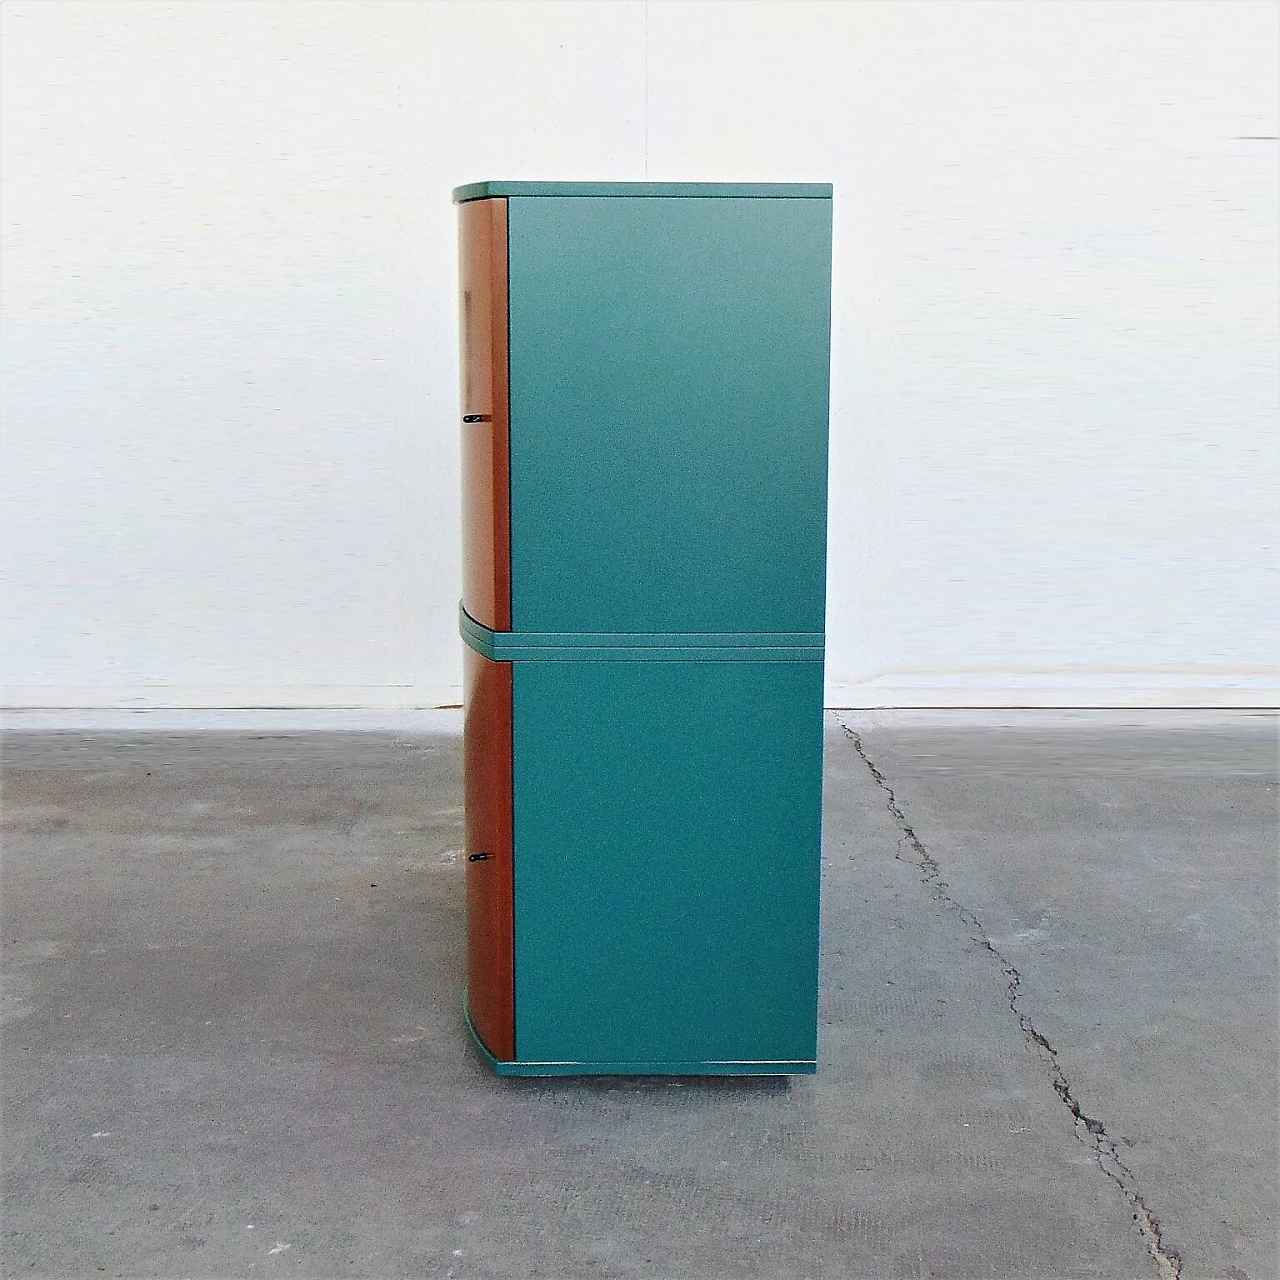 Sideboard Green Satin Lacquer, Doors in Walnut-Stained Cherry, for Roche Bobois, 1990s 1167295